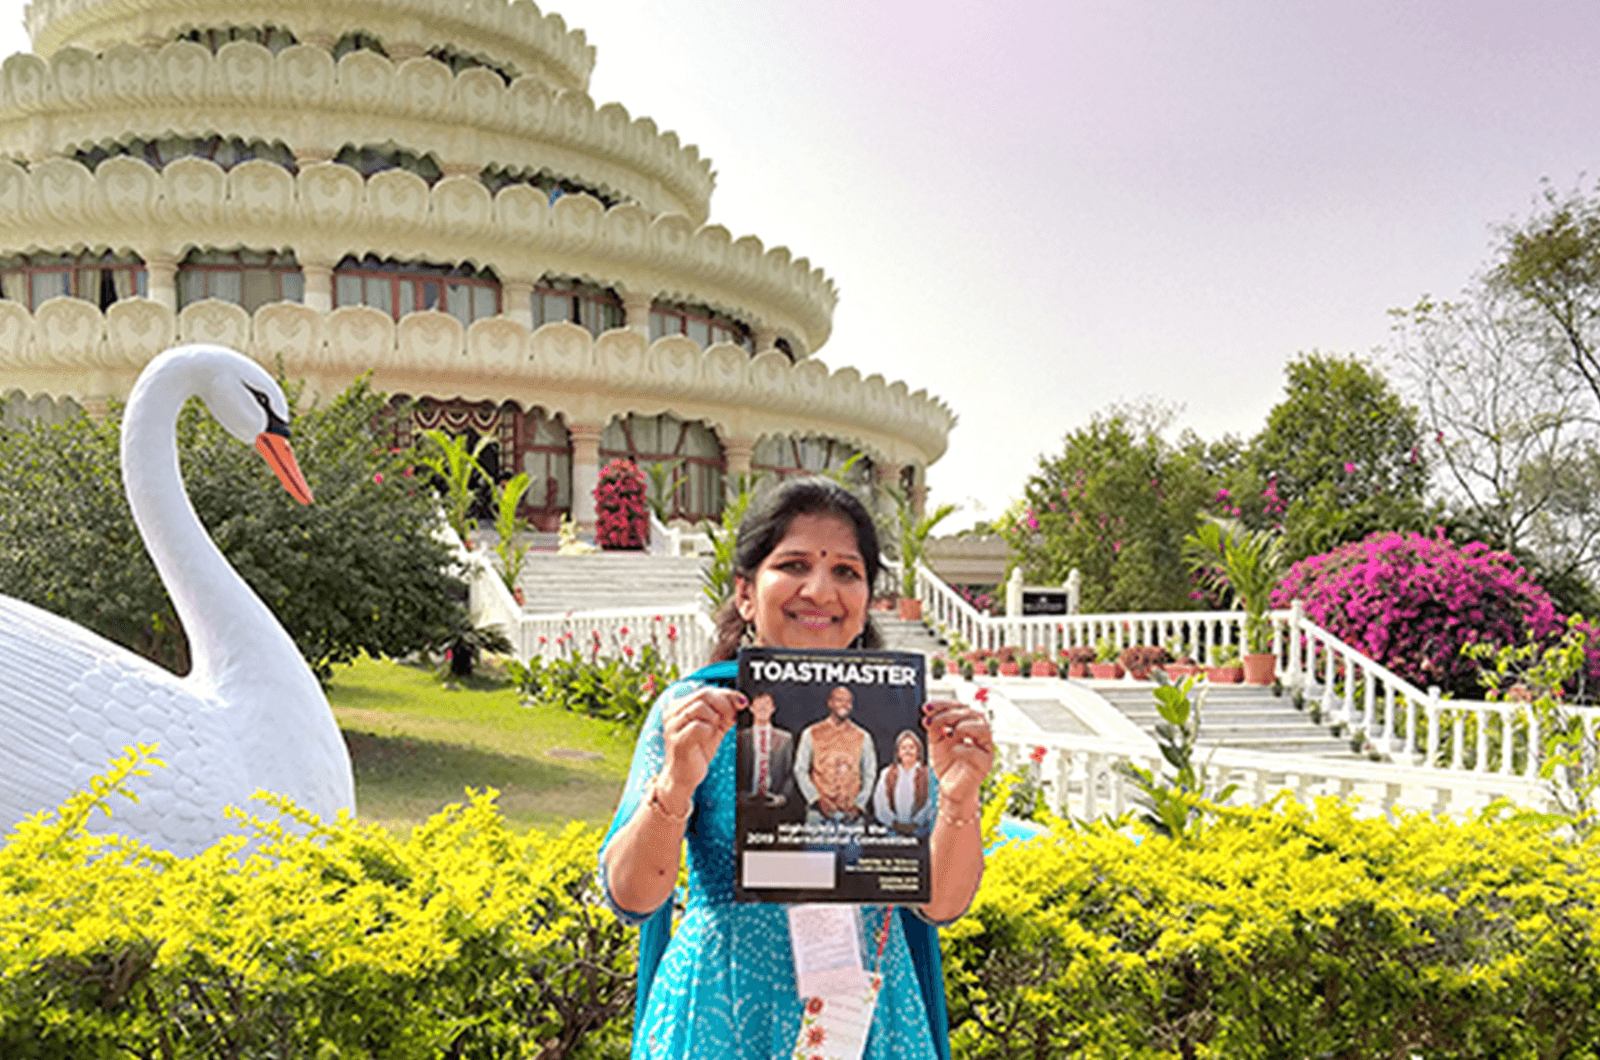 Bindu Bansal of Ambala, Haryana, India, poses in front of Vishalakshi Mantap—a meditation hall—in Bengaluru, Karnataka, India. The glass dome on the top on the building is adorned with a decorative kalash that is 15 feet, 3 inches high (4.64 meters)—the tallest in Asia.